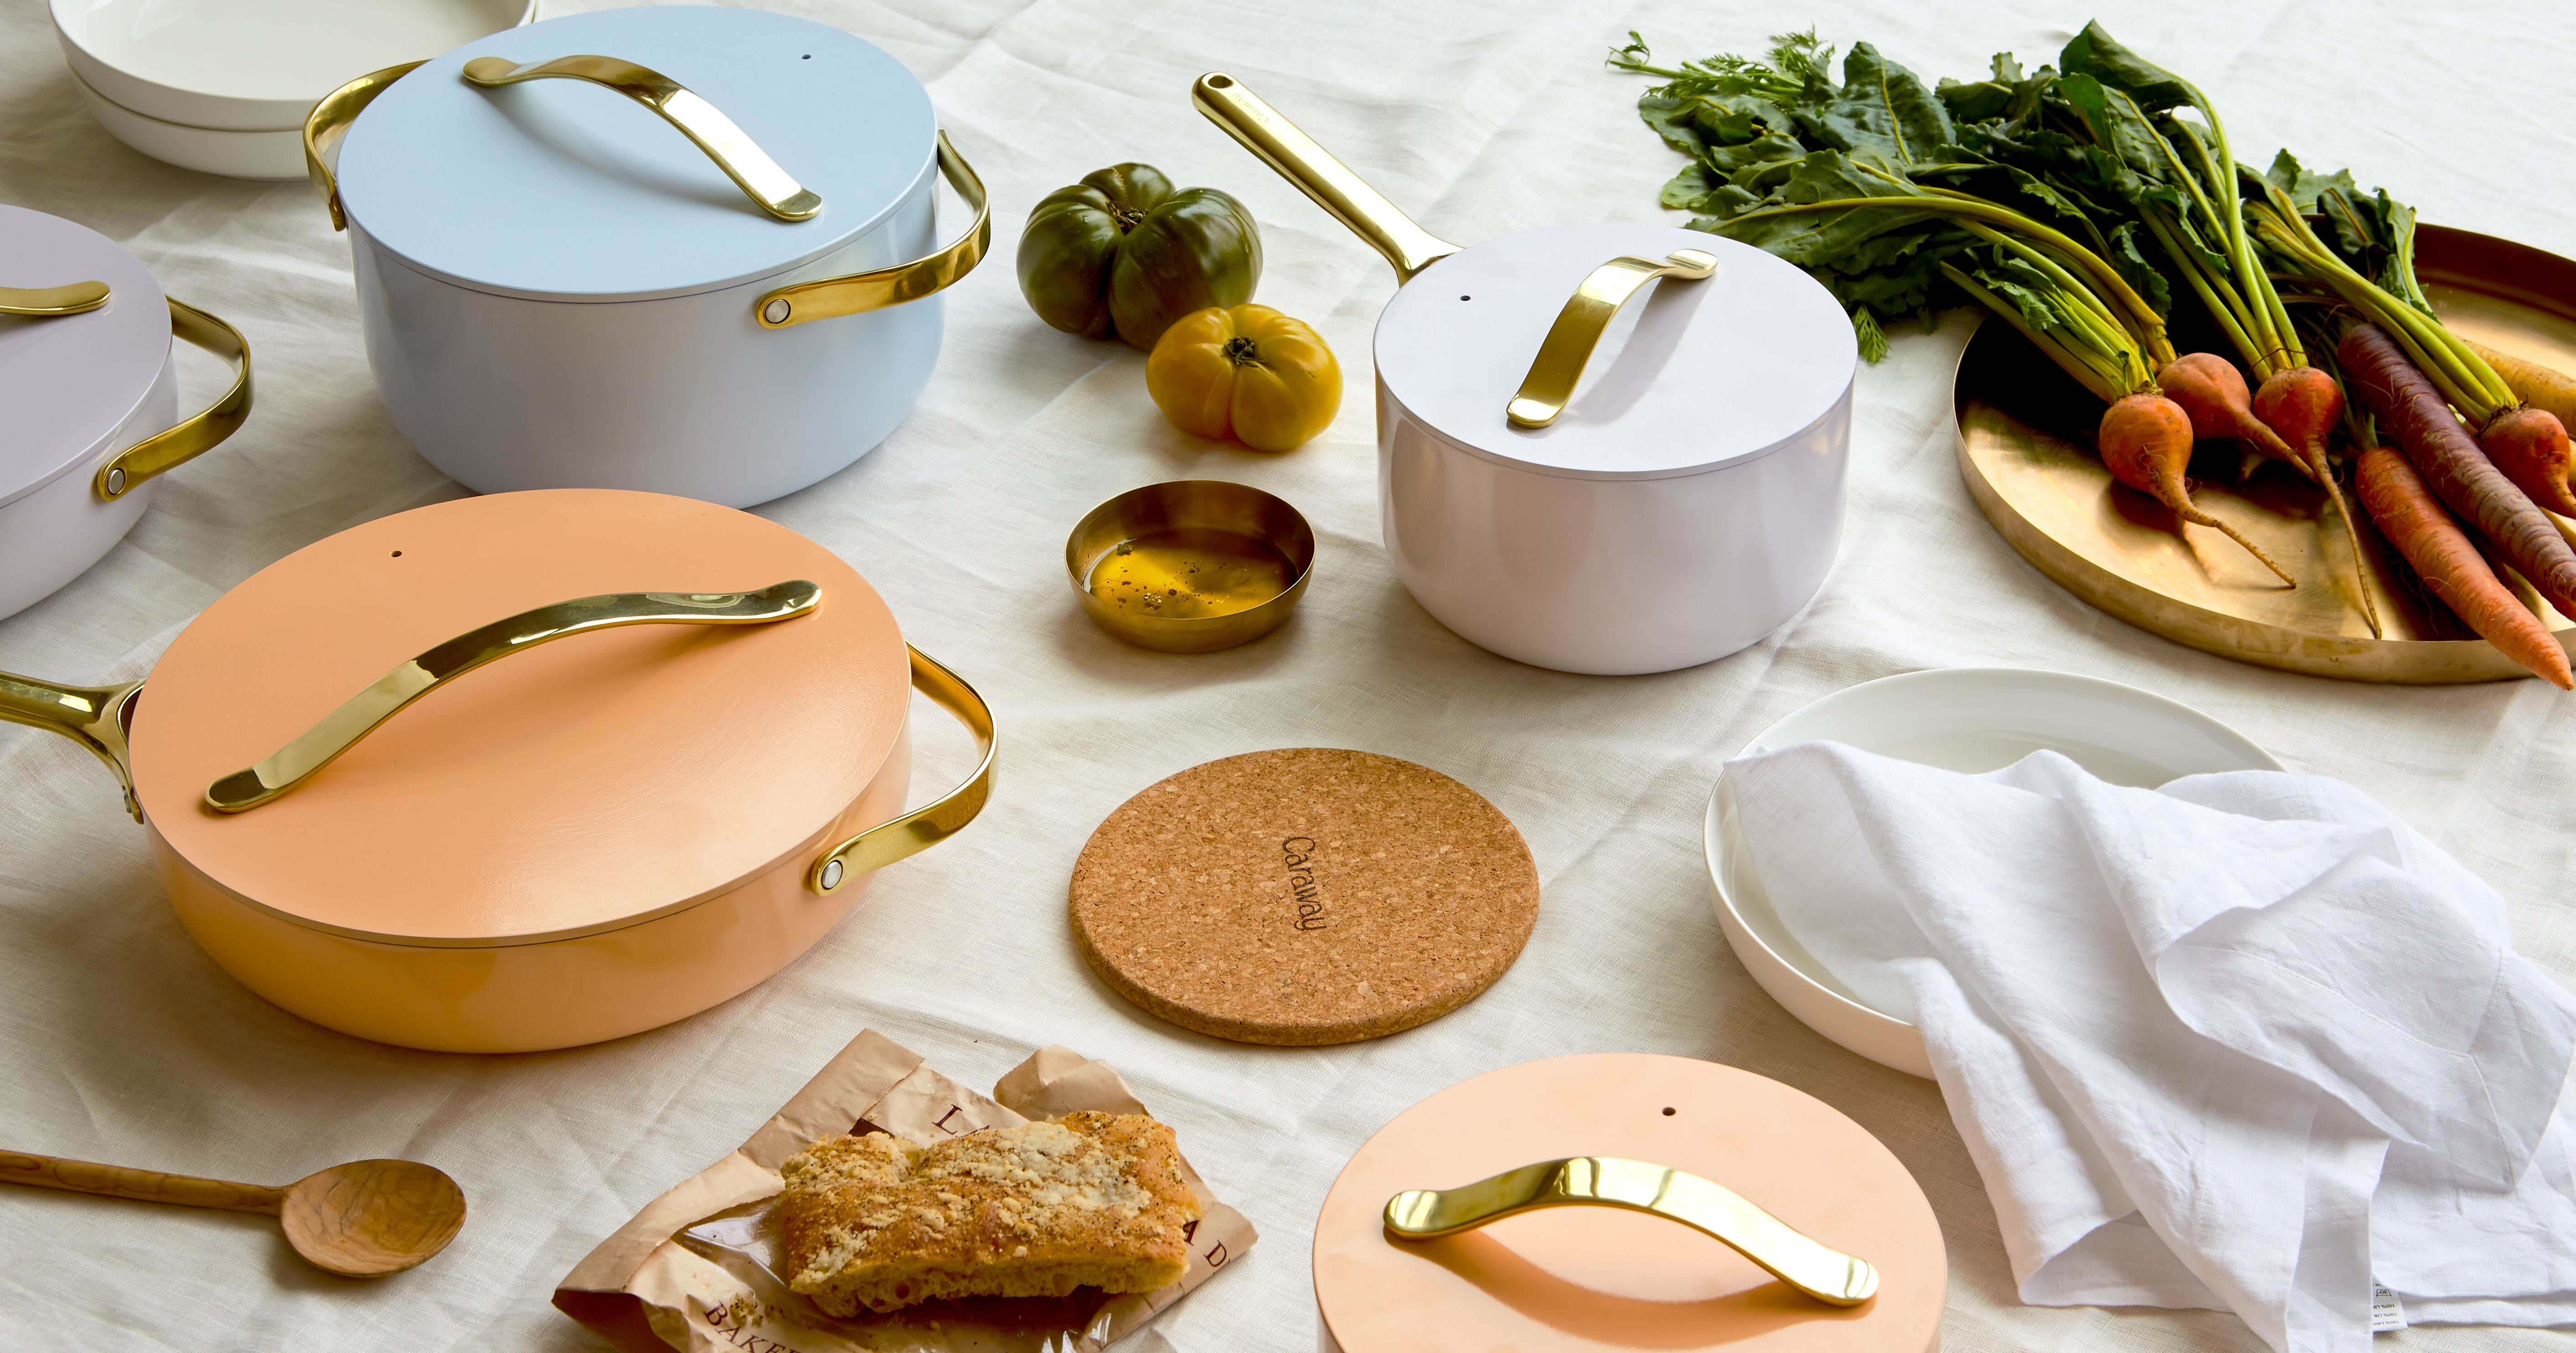 Caraway's New Pastel “Full Bloom” Cookware Set Launch